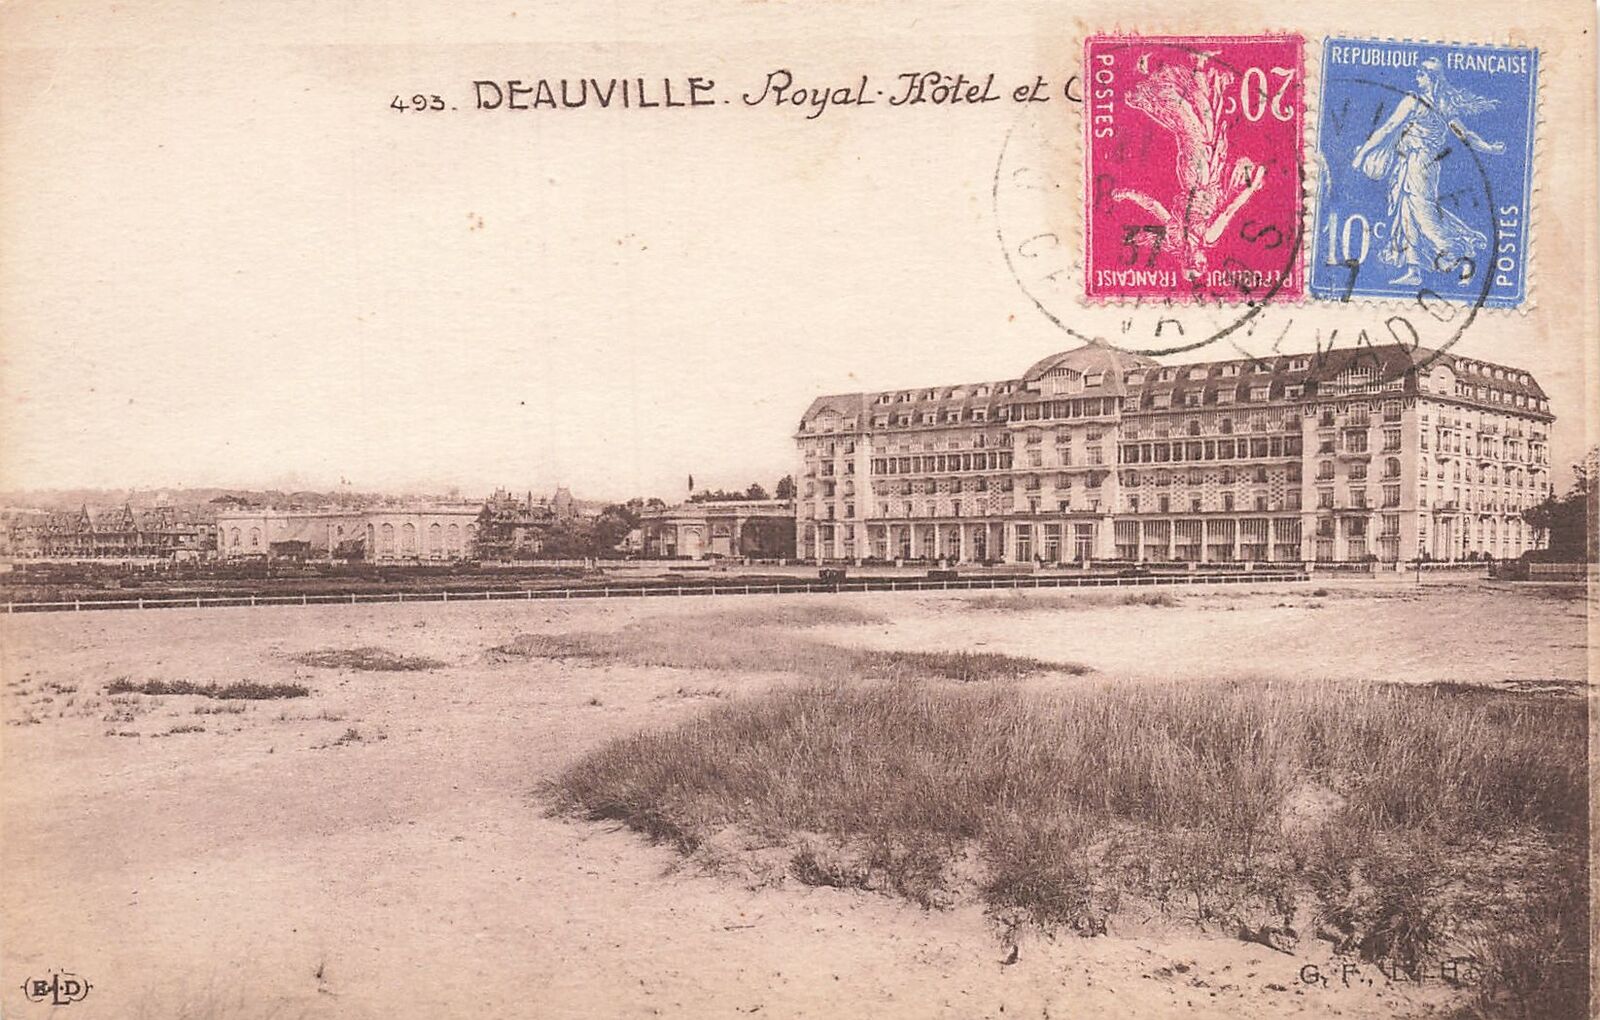 14 DEAUVILLE ROYAL HOTEL